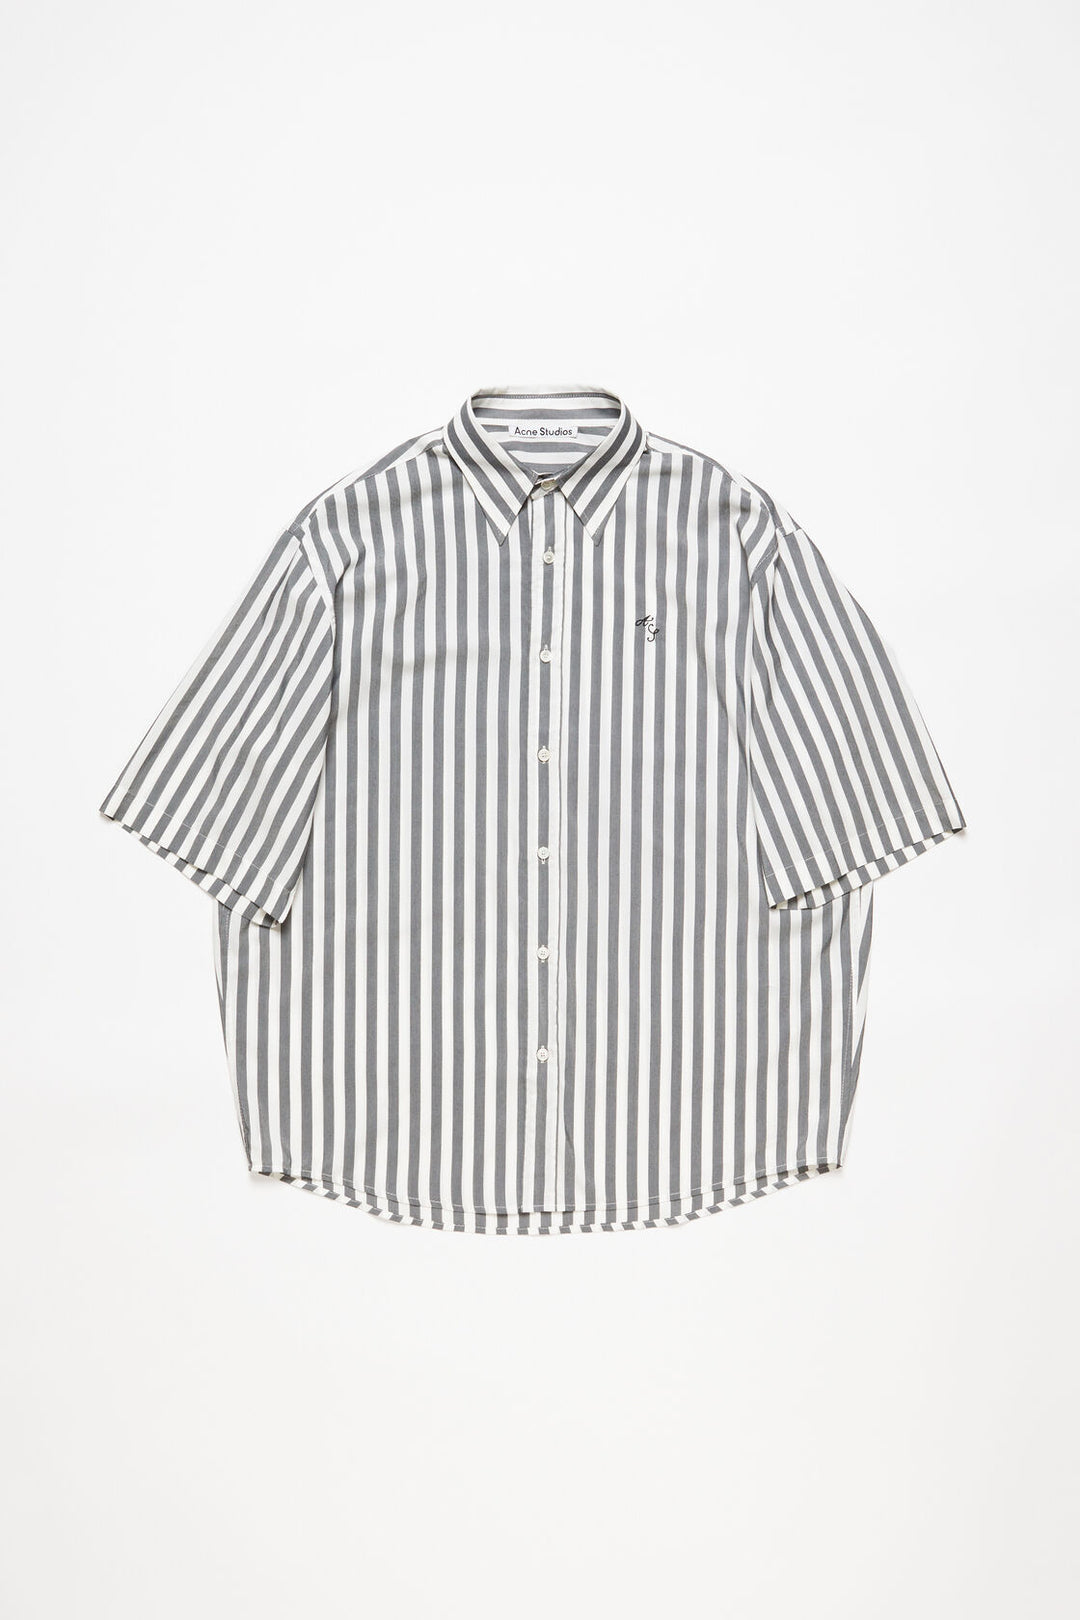 ACNE STUDIOS - STRIPE BUTTON-UP SHIRT BLACK AND WHITE - Dale